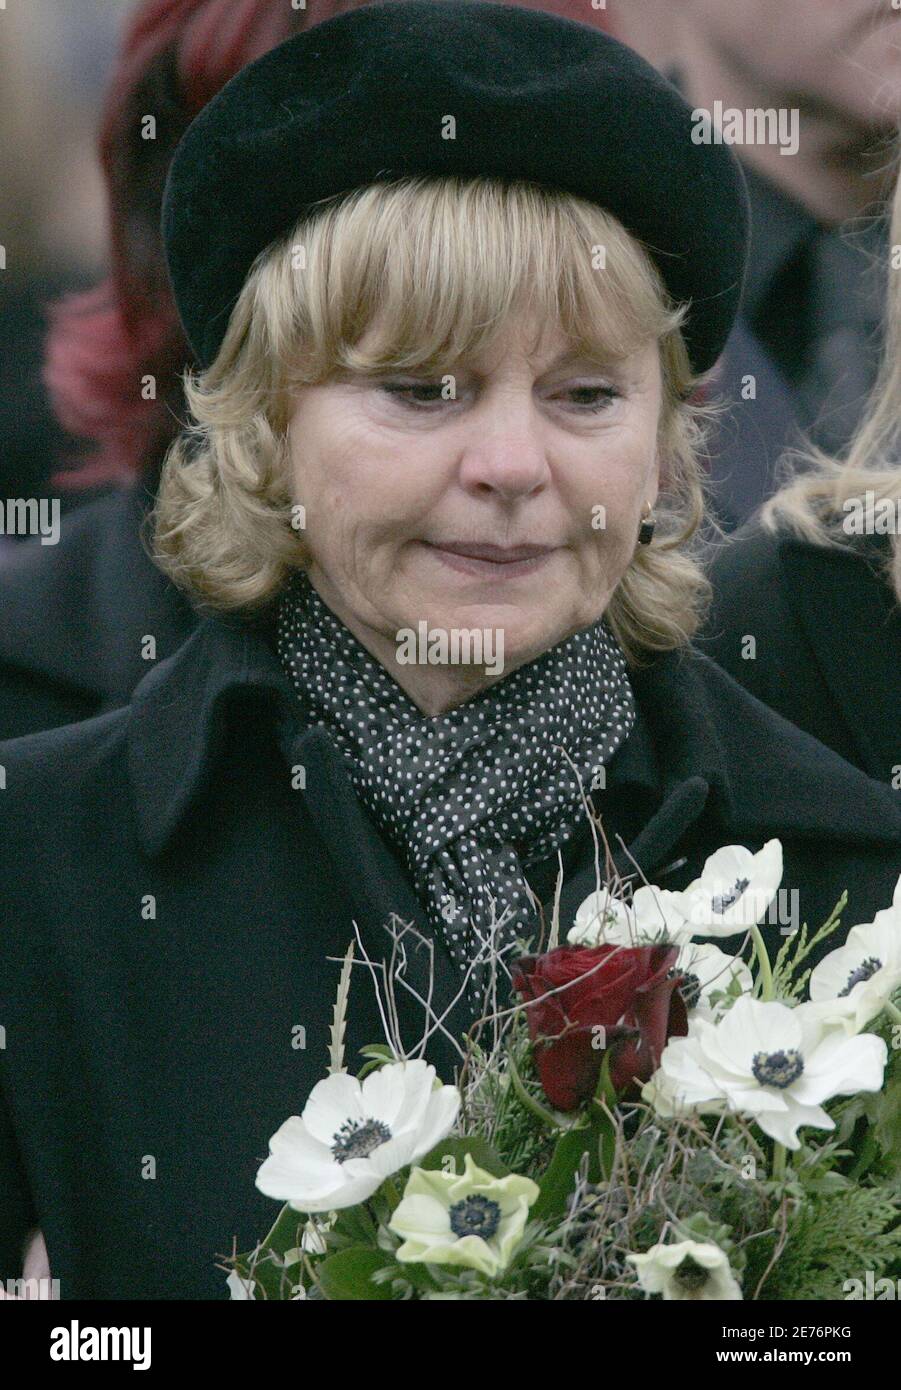 Andrea Wolf, widow of former spymaster Markus Wolf, attends the funeral service for her husband in Berlin November 25, 2006.  Wolf, who ran East Germany's foreign intelligence network for over 30 years, died on November 9, 2006 aged 83 in the German capital.      REUTERS/Tobias Schwarz     (GERMANY) Stock Photo